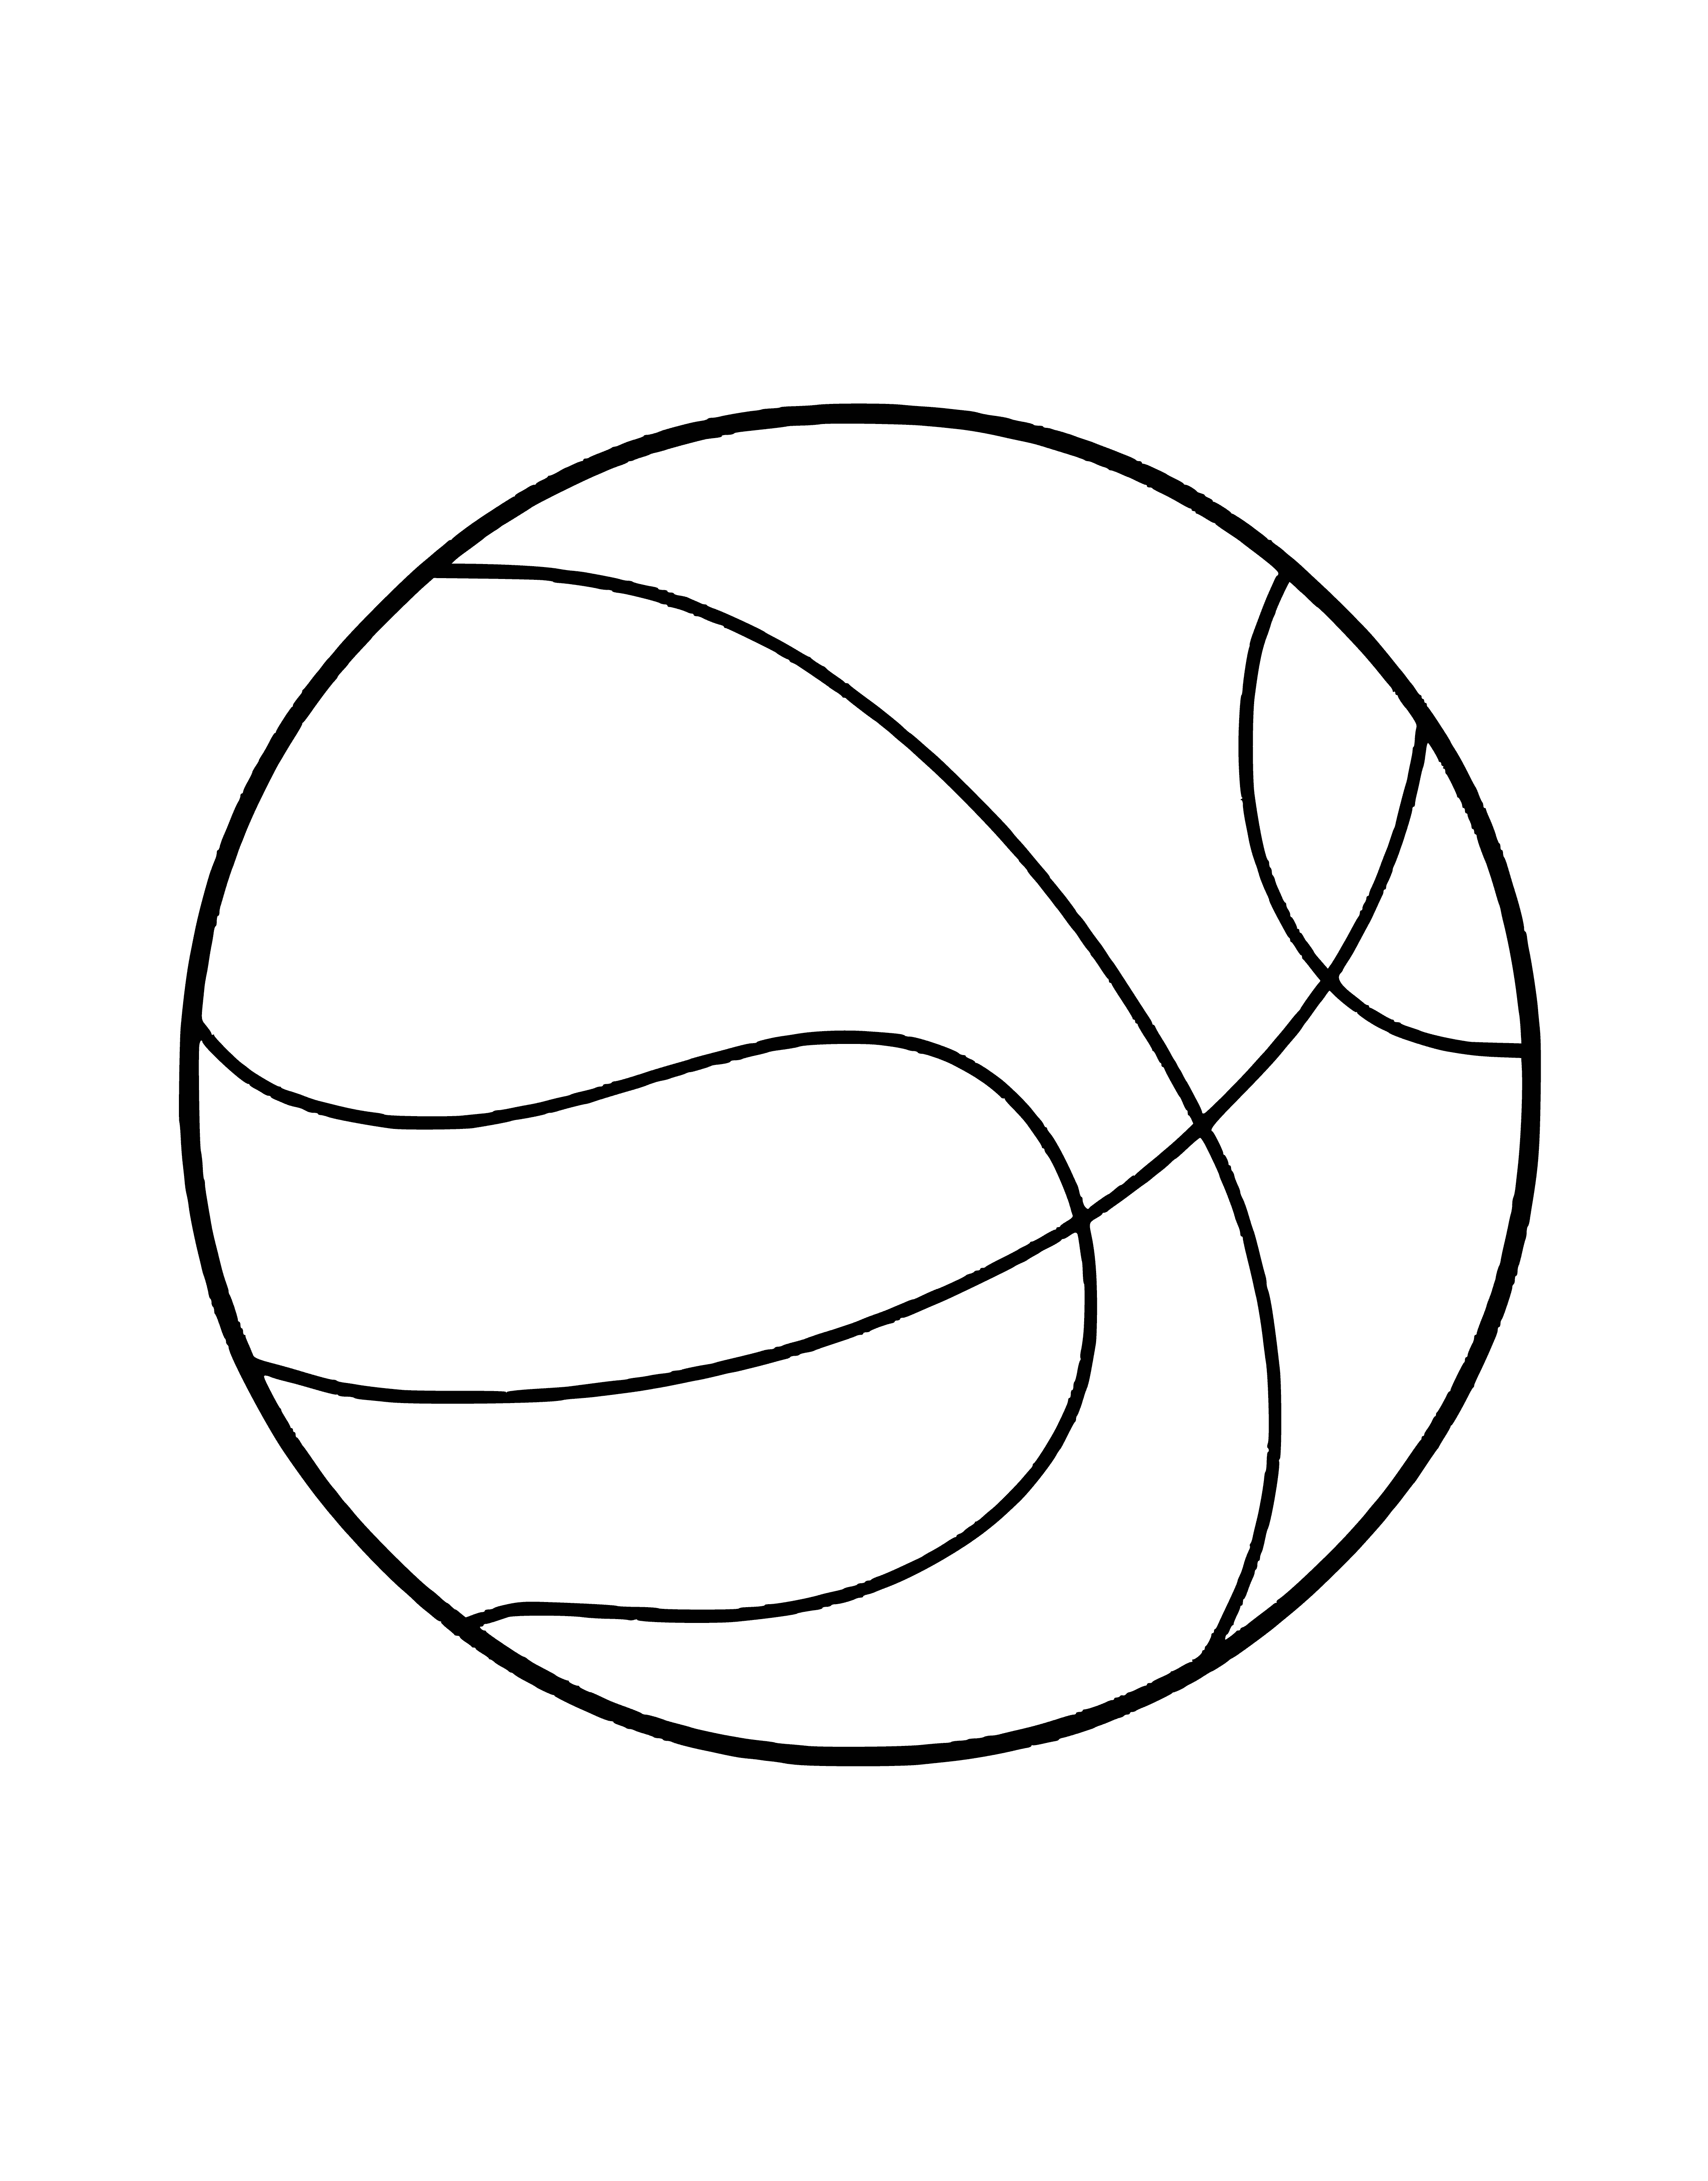 coloring page: A round, orange basketball made of rubber, inflated with air, with a circumference of 30" and weight of 22oz. Smooth surface and evenly distributed seams.